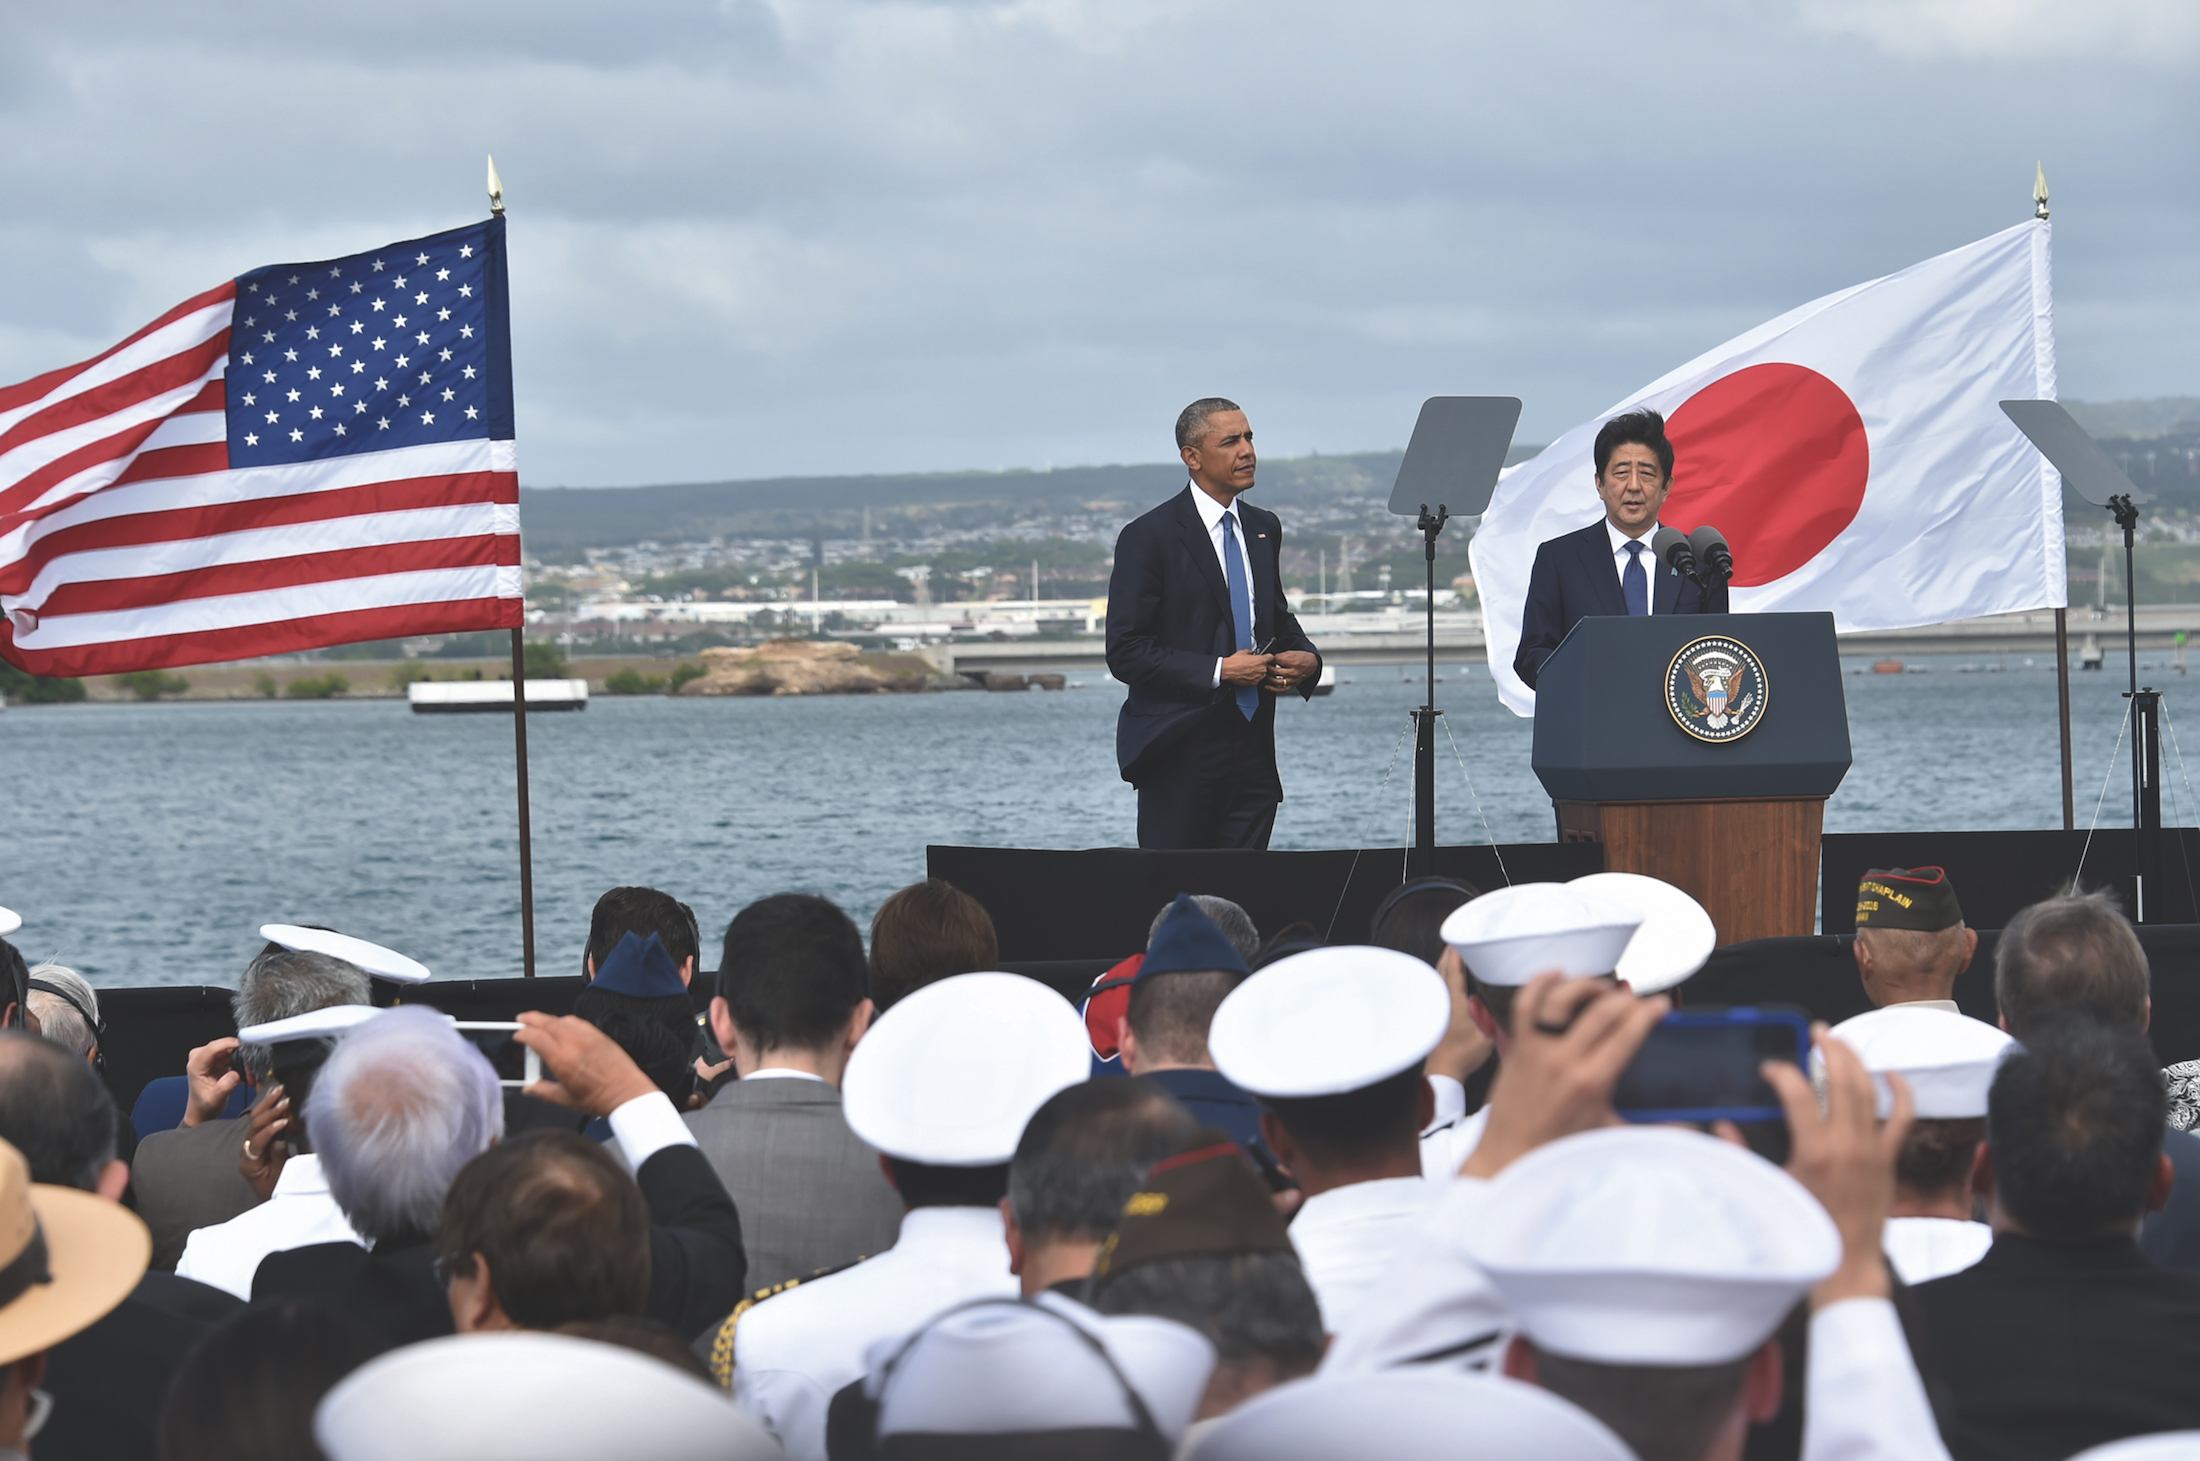 President Barack Obama of the U.S. and Prime Minister Shinzo Abe of Japan at the Joint Statement Ceremony, Pearl Harbor, Hawaii (December 2016).